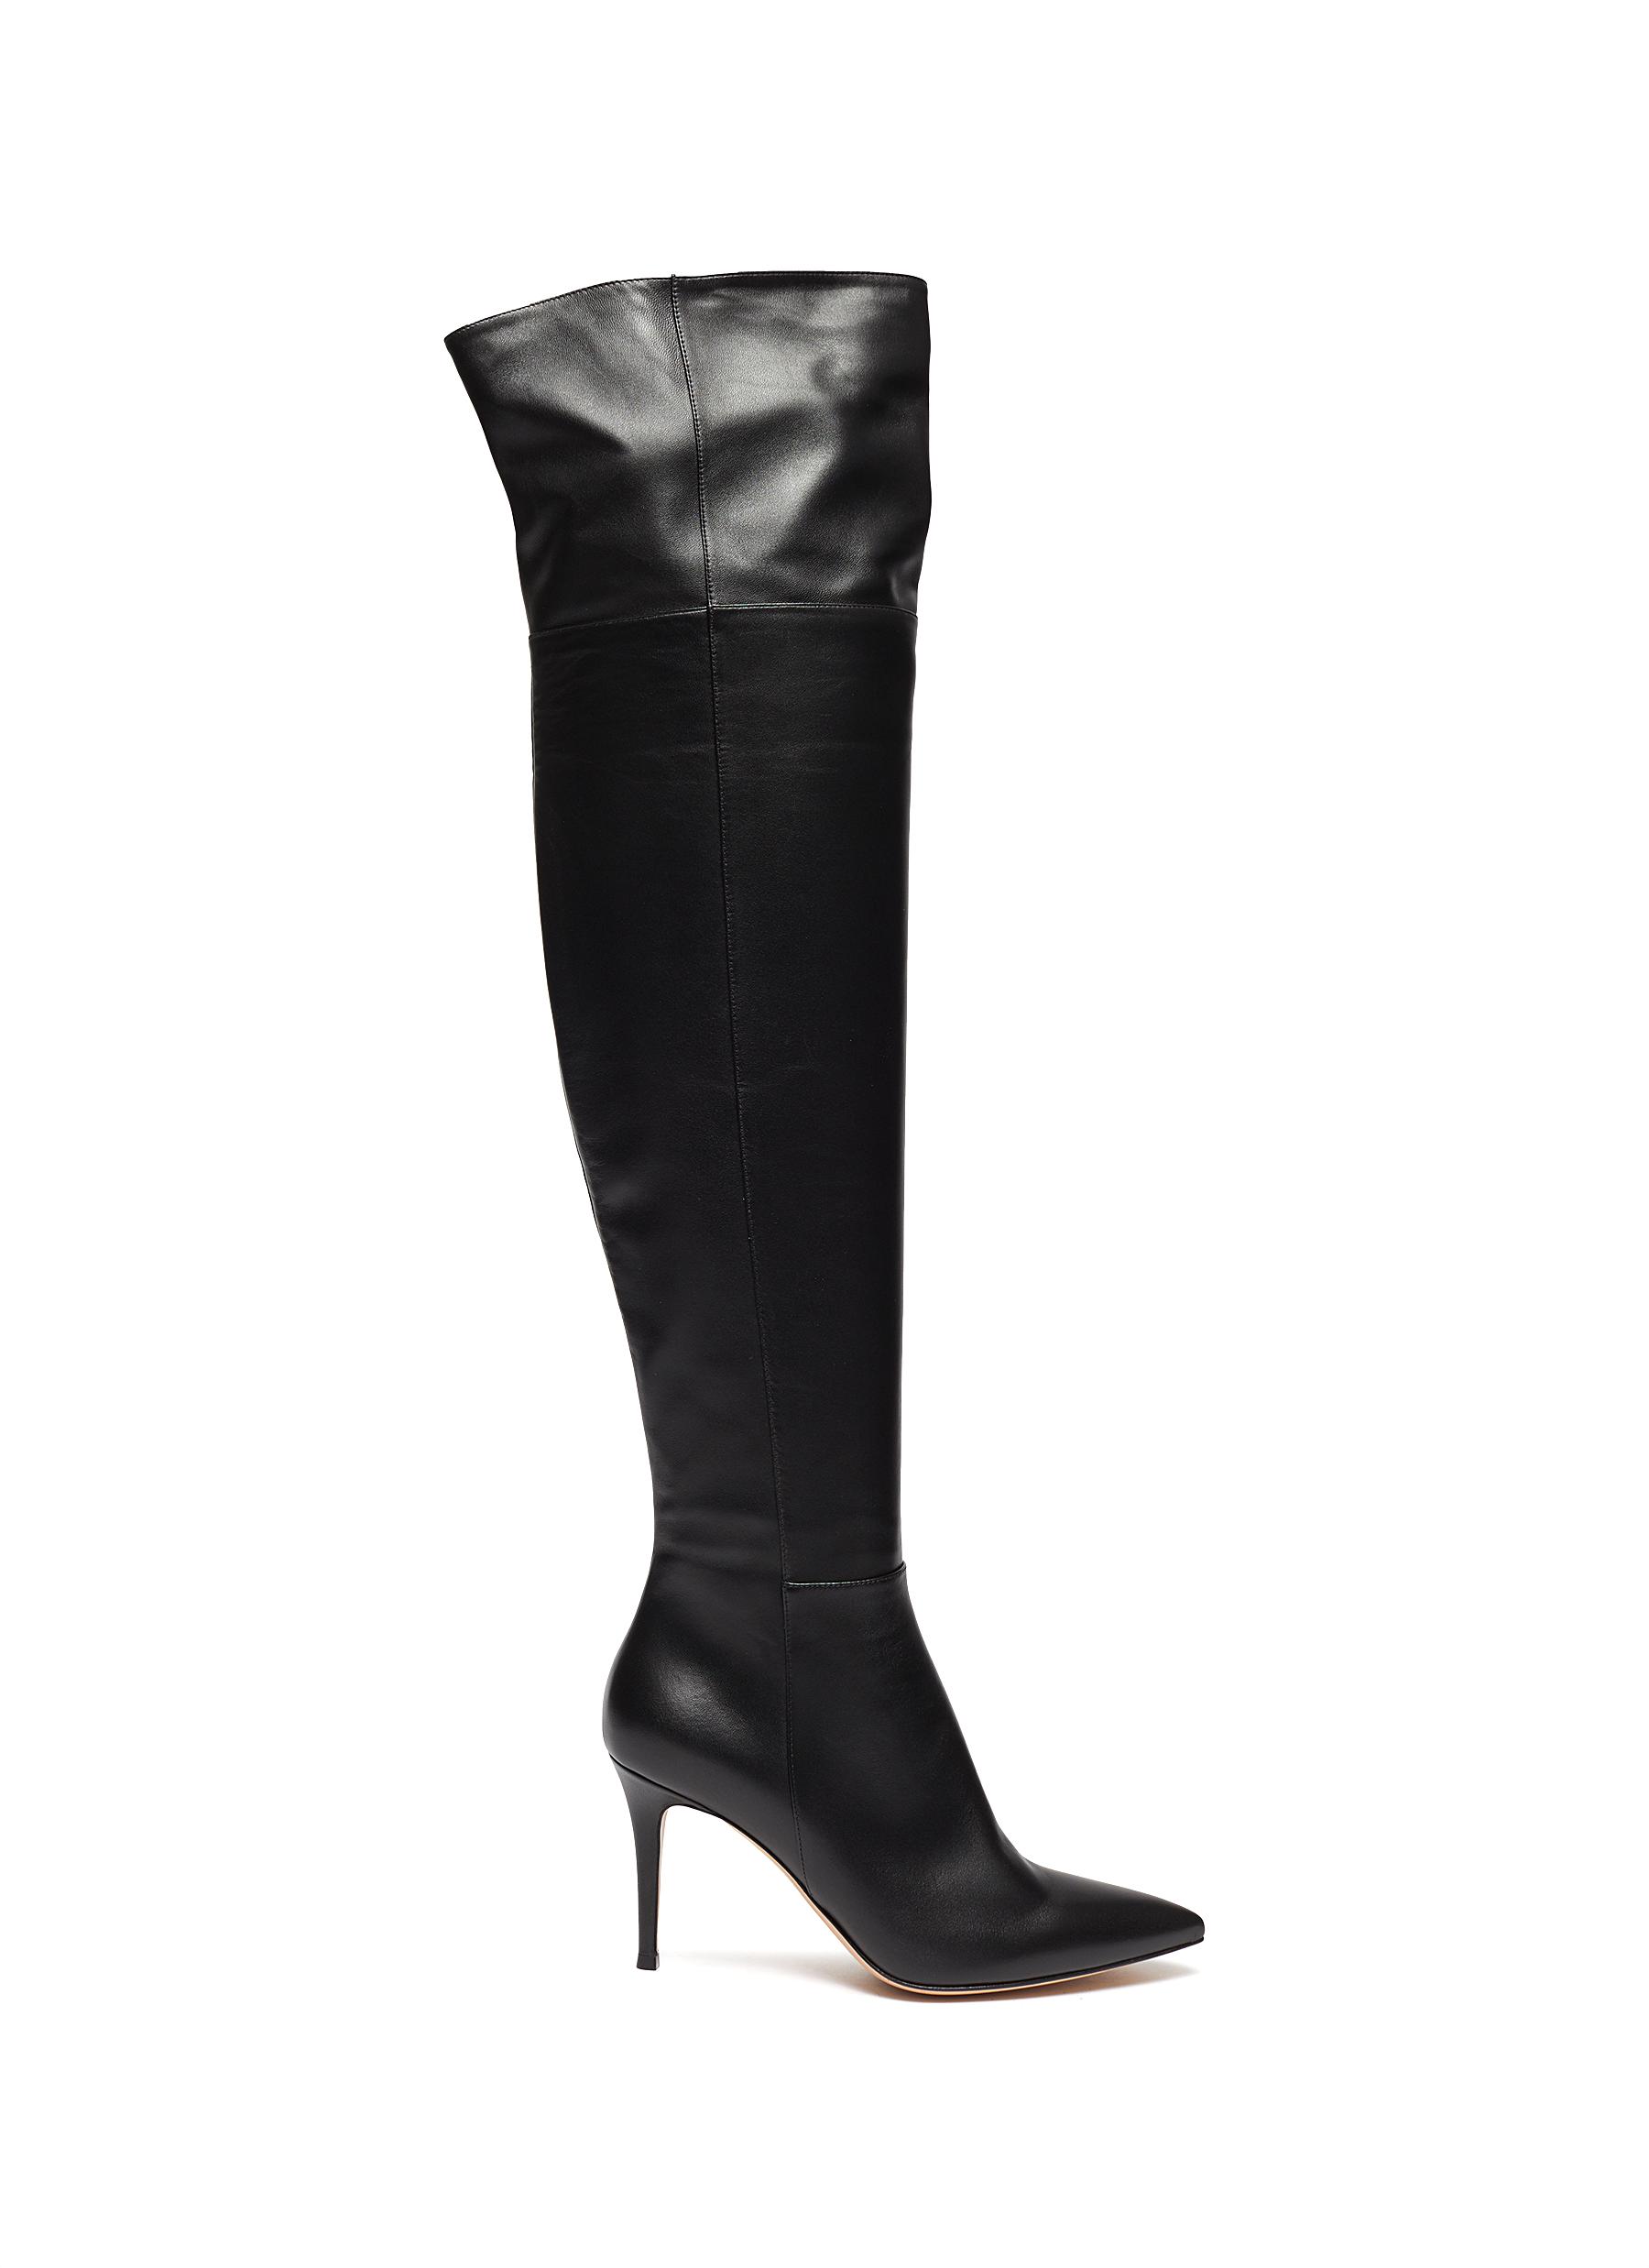 GIANVITO ROSSI | Leather thigh high 